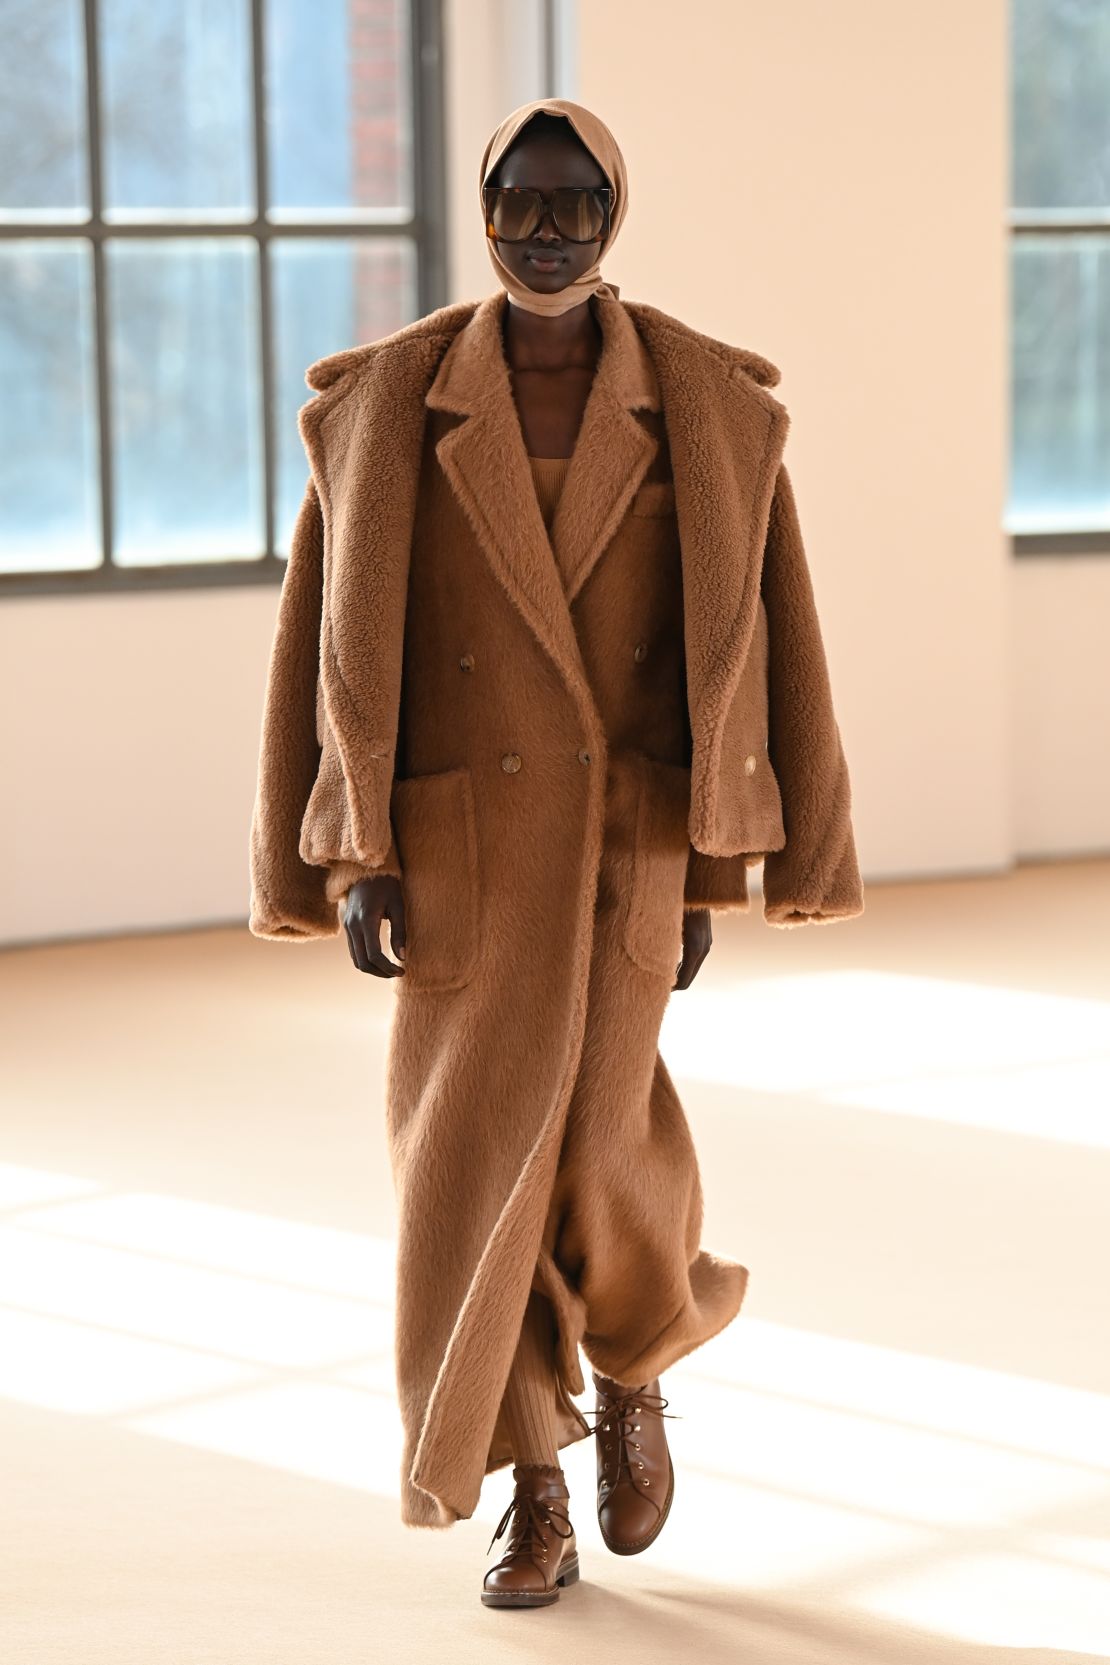 The new collection shown at Milan Fashion Week reimagines Max Mara's trademark camel coat.